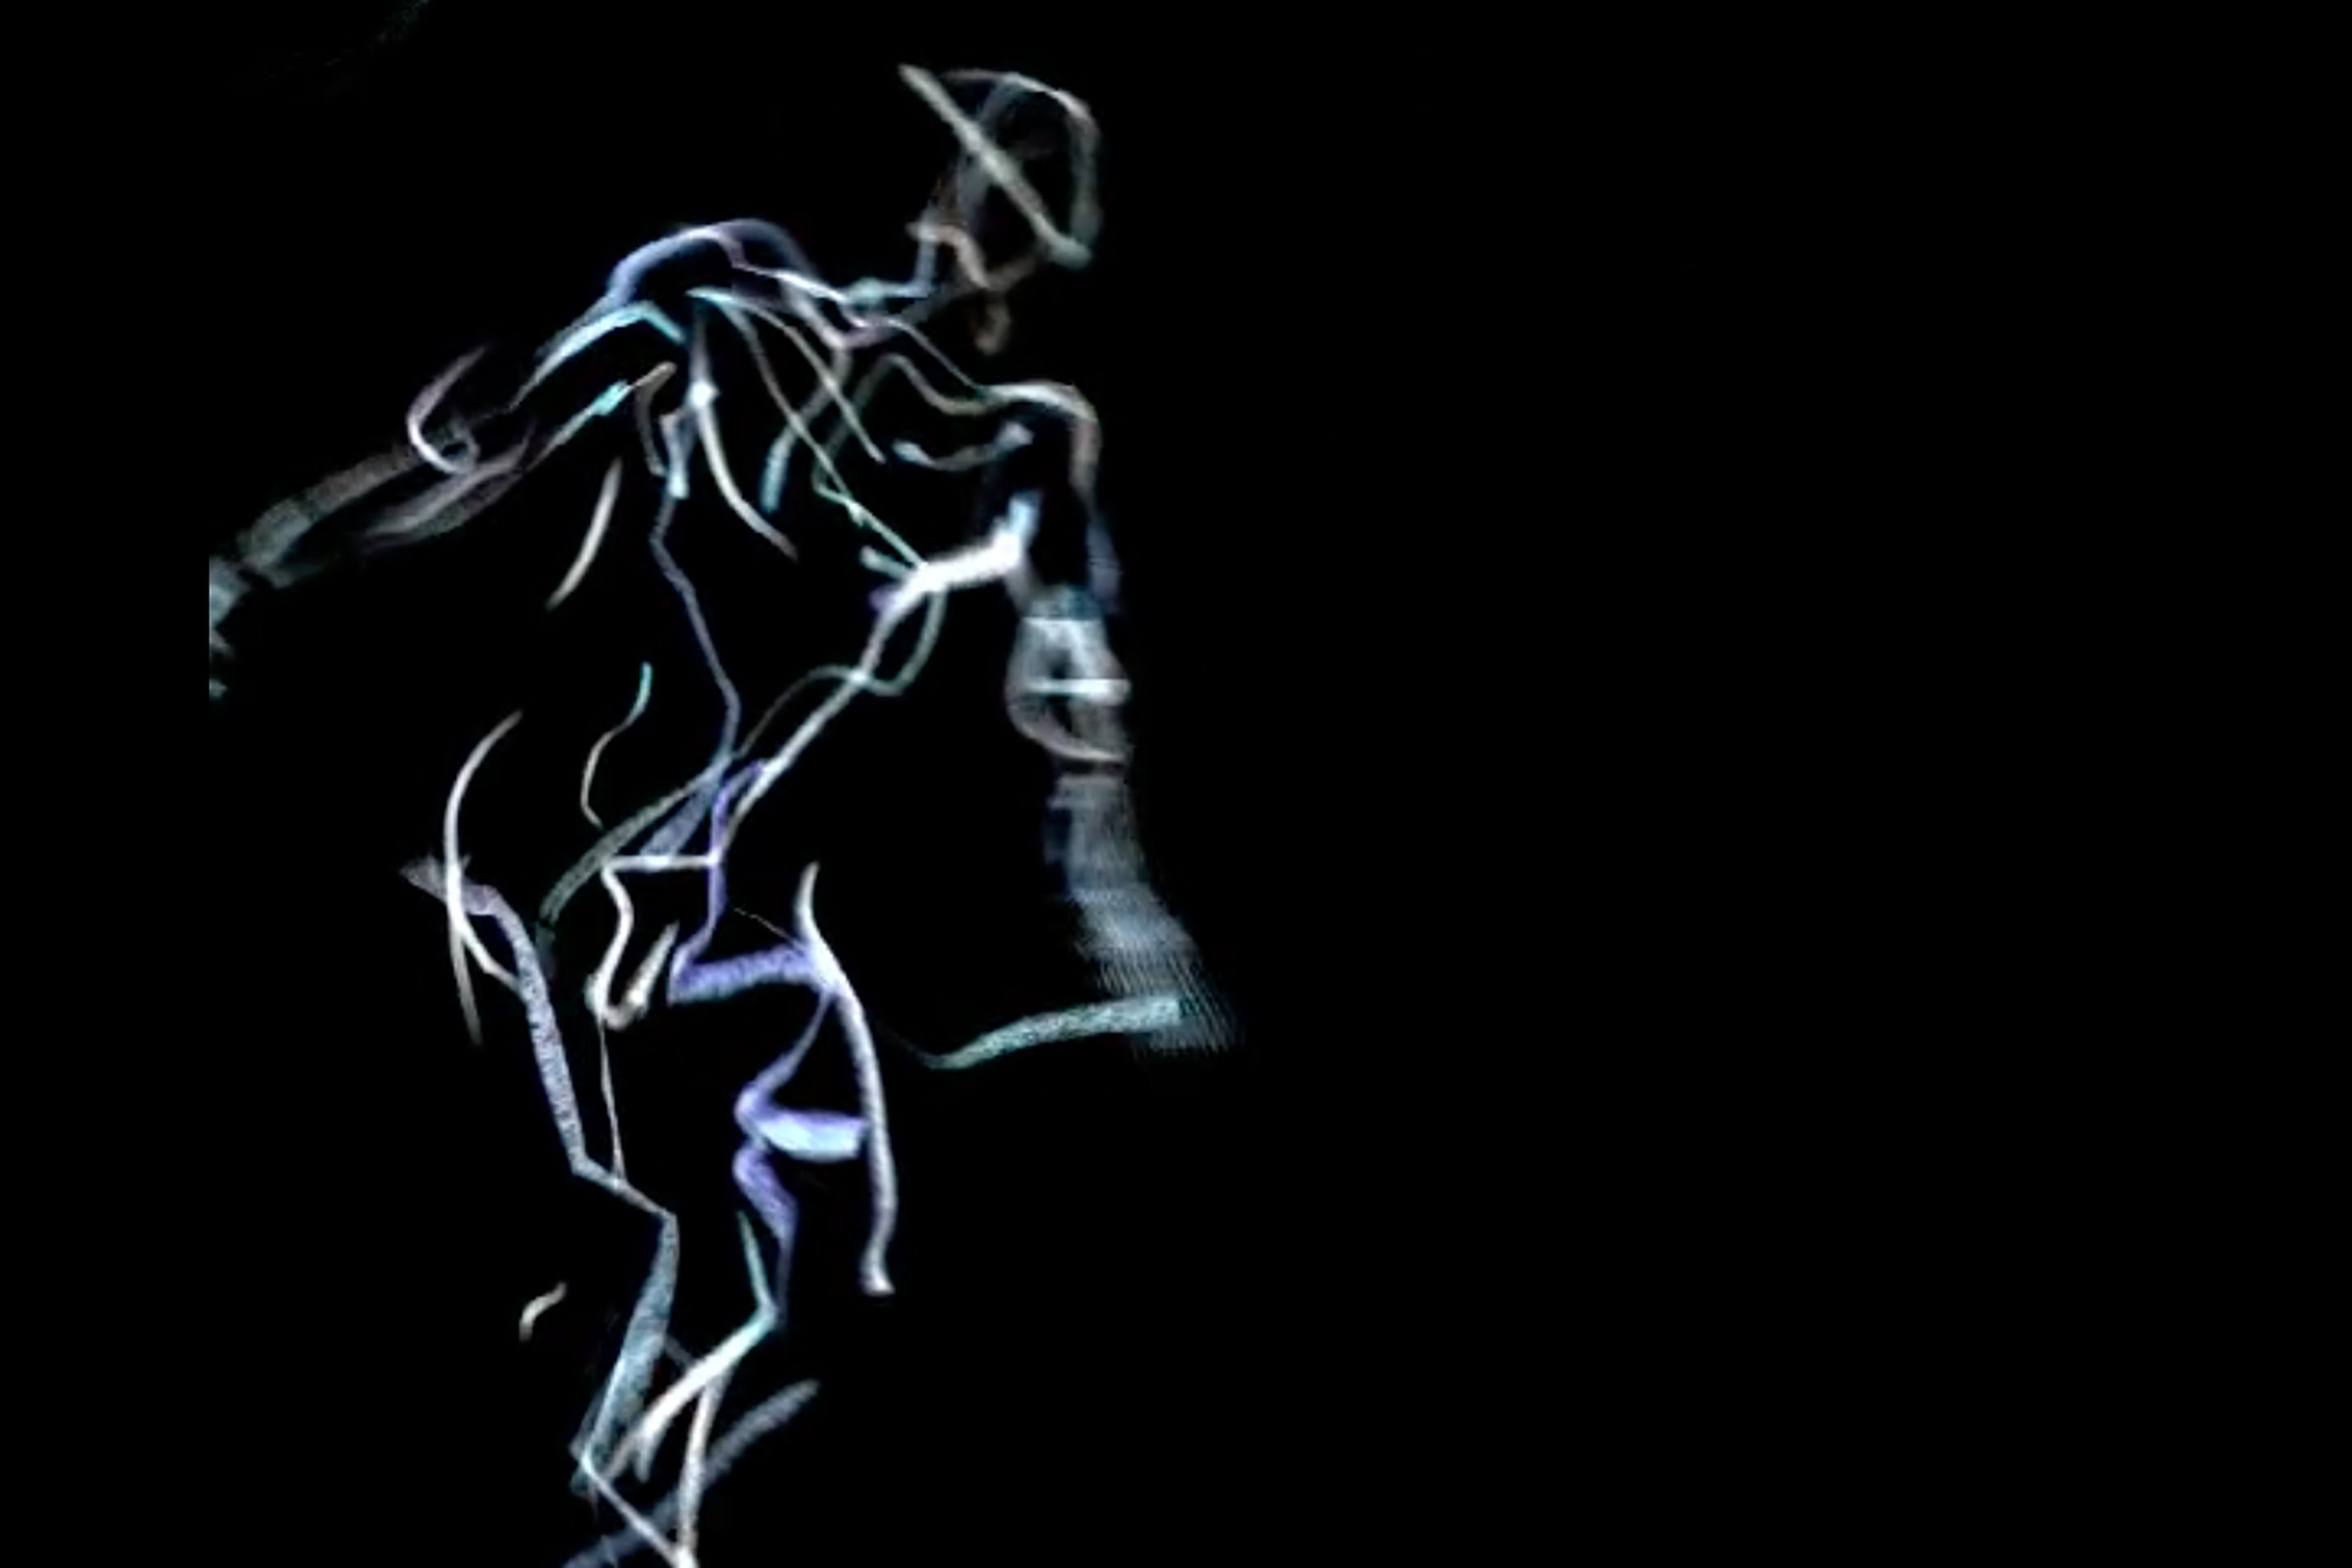 Still from Ghostcatching virtual dance performance